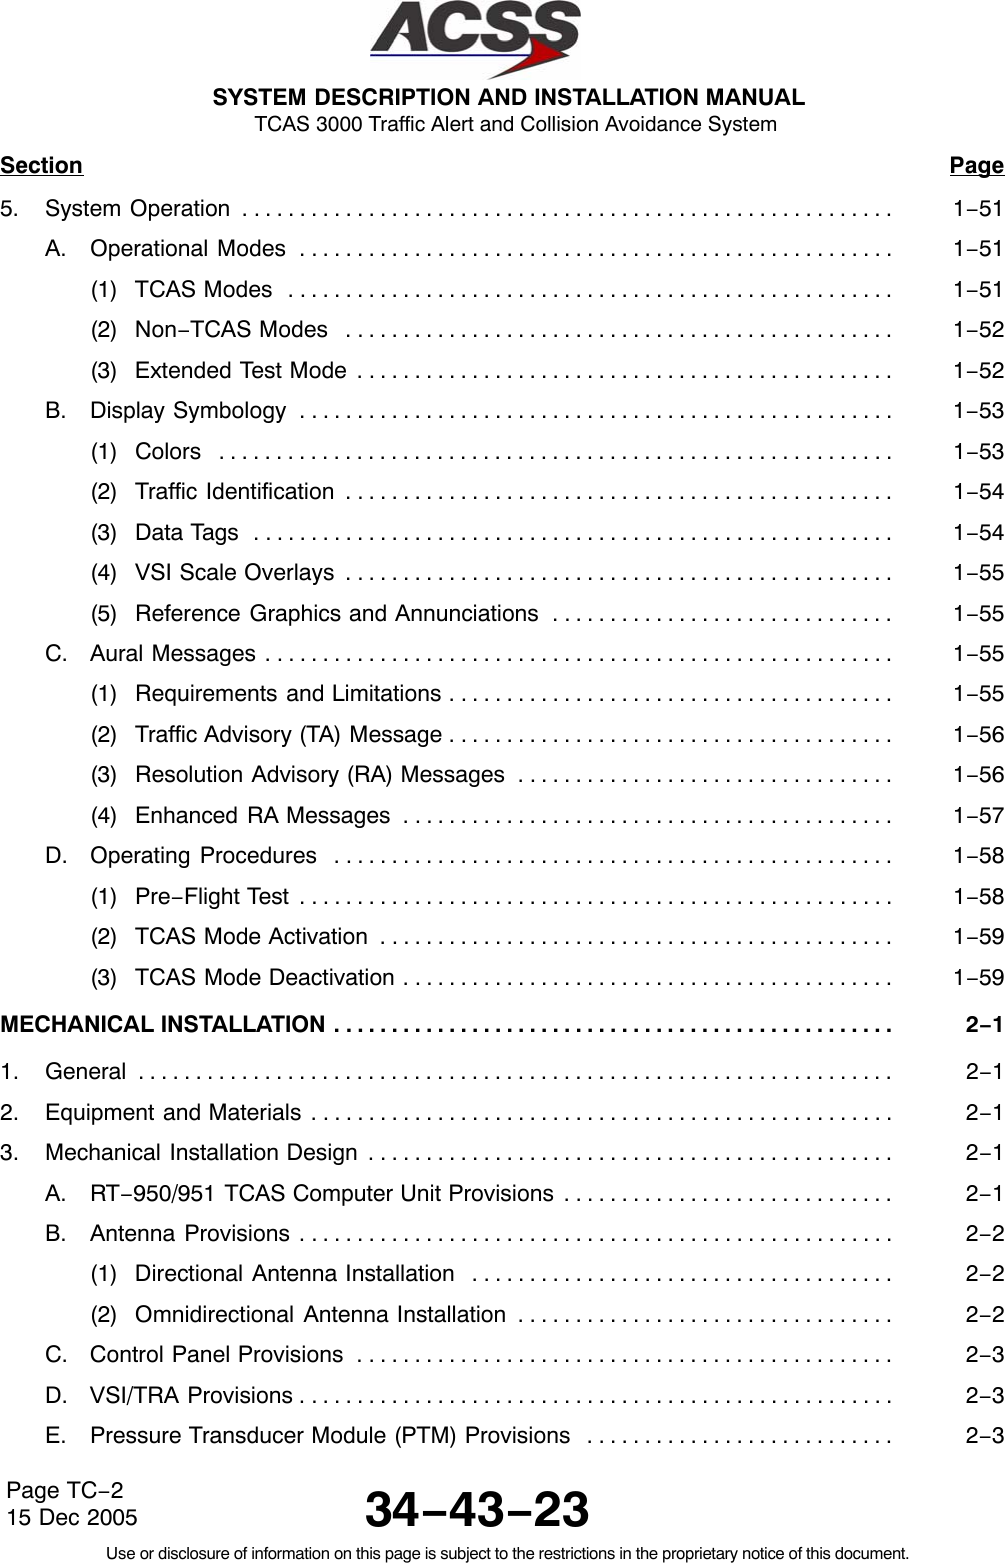 SYSTEM DESCRIPTION AND INSTALLATION MANUAL TCAS 3000 Traffic Alert and Collision Avoidance System34−43−23Use or disclosure of information on this page is subject to the restrictions in the proprietary notice of this document.Page TC−215 Dec 2005Section Page5. System Operation 1−51. . . . . . . . . . . . . . . . . . . . . . . . . . . . . . . . . . . . . . . . . . . . . . . . . . . . . . . . . A. Operational Modes 1−51. . . . . . . . . . . . . . . . . . . . . . . . . . . . . . . . . . . . . . . . . . . . . . . . . . . . (1) TCAS Modes 1−51. . . . . . . . . . . . . . . . . . . . . . . . . . . . . . . . . . . . . . . . . . . . . . . . . . . . . (2) Non−TCAS Modes 1−52. . . . . . . . . . . . . . . . . . . . . . . . . . . . . . . . . . . . . . . . . . . . . . . . (3) Extended Test Mode 1−52. . . . . . . . . . . . . . . . . . . . . . . . . . . . . . . . . . . . . . . . . . . . . . . B. Display Symbology 1−53. . . . . . . . . . . . . . . . . . . . . . . . . . . . . . . . . . . . . . . . . . . . . . . . . . . . (1) Colors 1−53. . . . . . . . . . . . . . . . . . . . . . . . . . . . . . . . . . . . . . . . . . . . . . . . . . . . . . . . . . . (2) Traffic Identification 1−54. . . . . . . . . . . . . . . . . . . . . . . . . . . . . . . . . . . . . . . . . . . . . . . . (3) Data Tags 1−54. . . . . . . . . . . . . . . . . . . . . . . . . . . . . . . . . . . . . . . . . . . . . . . . . . . . . . . . (4) VSI Scale Overlays 1−55. . . . . . . . . . . . . . . . . . . . . . . . . . . . . . . . . . . . . . . . . . . . . . . . (5) Reference Graphics and Annunciations 1−55. . . . . . . . . . . . . . . . . . . . . . . . . . . . . . C. Aural Messages 1−55. . . . . . . . . . . . . . . . . . . . . . . . . . . . . . . . . . . . . . . . . . . . . . . . . . . . . . . (1) Requirements and Limitations 1−55. . . . . . . . . . . . . . . . . . . . . . . . . . . . . . . . . . . . . . . (2) Traffic Advisory (TA) Message 1−56. . . . . . . . . . . . . . . . . . . . . . . . . . . . . . . . . . . . . . . (3) Resolution Advisory (RA) Messages 1−56. . . . . . . . . . . . . . . . . . . . . . . . . . . . . . . . . (4) Enhanced RA Messages 1−57. . . . . . . . . . . . . . . . . . . . . . . . . . . . . . . . . . . . . . . . . . . D. Operating Procedures 1−58. . . . . . . . . . . . . . . . . . . . . . . . . . . . . . . . . . . . . . . . . . . . . . . . . (1) Pre−Flight Test 1−58. . . . . . . . . . . . . . . . . . . . . . . . . . . . . . . . . . . . . . . . . . . . . . . . . . . . (2) TCAS Mode Activation 1−59. . . . . . . . . . . . . . . . . . . . . . . . . . . . . . . . . . . . . . . . . . . . . (3) TCAS Mode Deactivation 1−59. . . . . . . . . . . . . . . . . . . . . . . . . . . . . . . . . . . . . . . . . . . MECHANICAL INSTALLATION 2−1. . . . . . . . . . . . . . . . . . . . . . . . . . . . . . . . . . . . . . . . . . . . . . . . . 1. General 2−1. . . . . . . . . . . . . . . . . . . . . . . . . . . . . . . . . . . . . . . . . . . . . . . . . . . . . . . . . . . . . . . . . . 2. Equipment and Materials 2−1. . . . . . . . . . . . . . . . . . . . . . . . . . . . . . . . . . . . . . . . . . . . . . . . . . . 3. Mechanical Installation Design 2−1. . . . . . . . . . . . . . . . . . . . . . . . . . . . . . . . . . . . . . . . . . . . . . A. RT−950/951 TCAS Computer Unit Provisions 2−1. . . . . . . . . . . . . . . . . . . . . . . . . . . . . B. Antenna Provisions 2−2. . . . . . . . . . . . . . . . . . . . . . . . . . . . . . . . . . . . . . . . . . . . . . . . . . . . (1) Directional Antenna Installation 2−2. . . . . . . . . . . . . . . . . . . . . . . . . . . . . . . . . . . . . (2) Omnidirectional Antenna Installation 2−2. . . . . . . . . . . . . . . . . . . . . . . . . . . . . . . . . C. Control Panel Provisions 2−3. . . . . . . . . . . . . . . . . . . . . . . . . . . . . . . . . . . . . . . . . . . . . . . D. VSI/TRA Provisions 2−3. . . . . . . . . . . . . . . . . . . . . . . . . . . . . . . . . . . . . . . . . . . . . . . . . . . . E. Pressure Transducer Module (PTM) Provisions 2−3. . . . . . . . . . . . . . . . . . . . . . . . . . . 